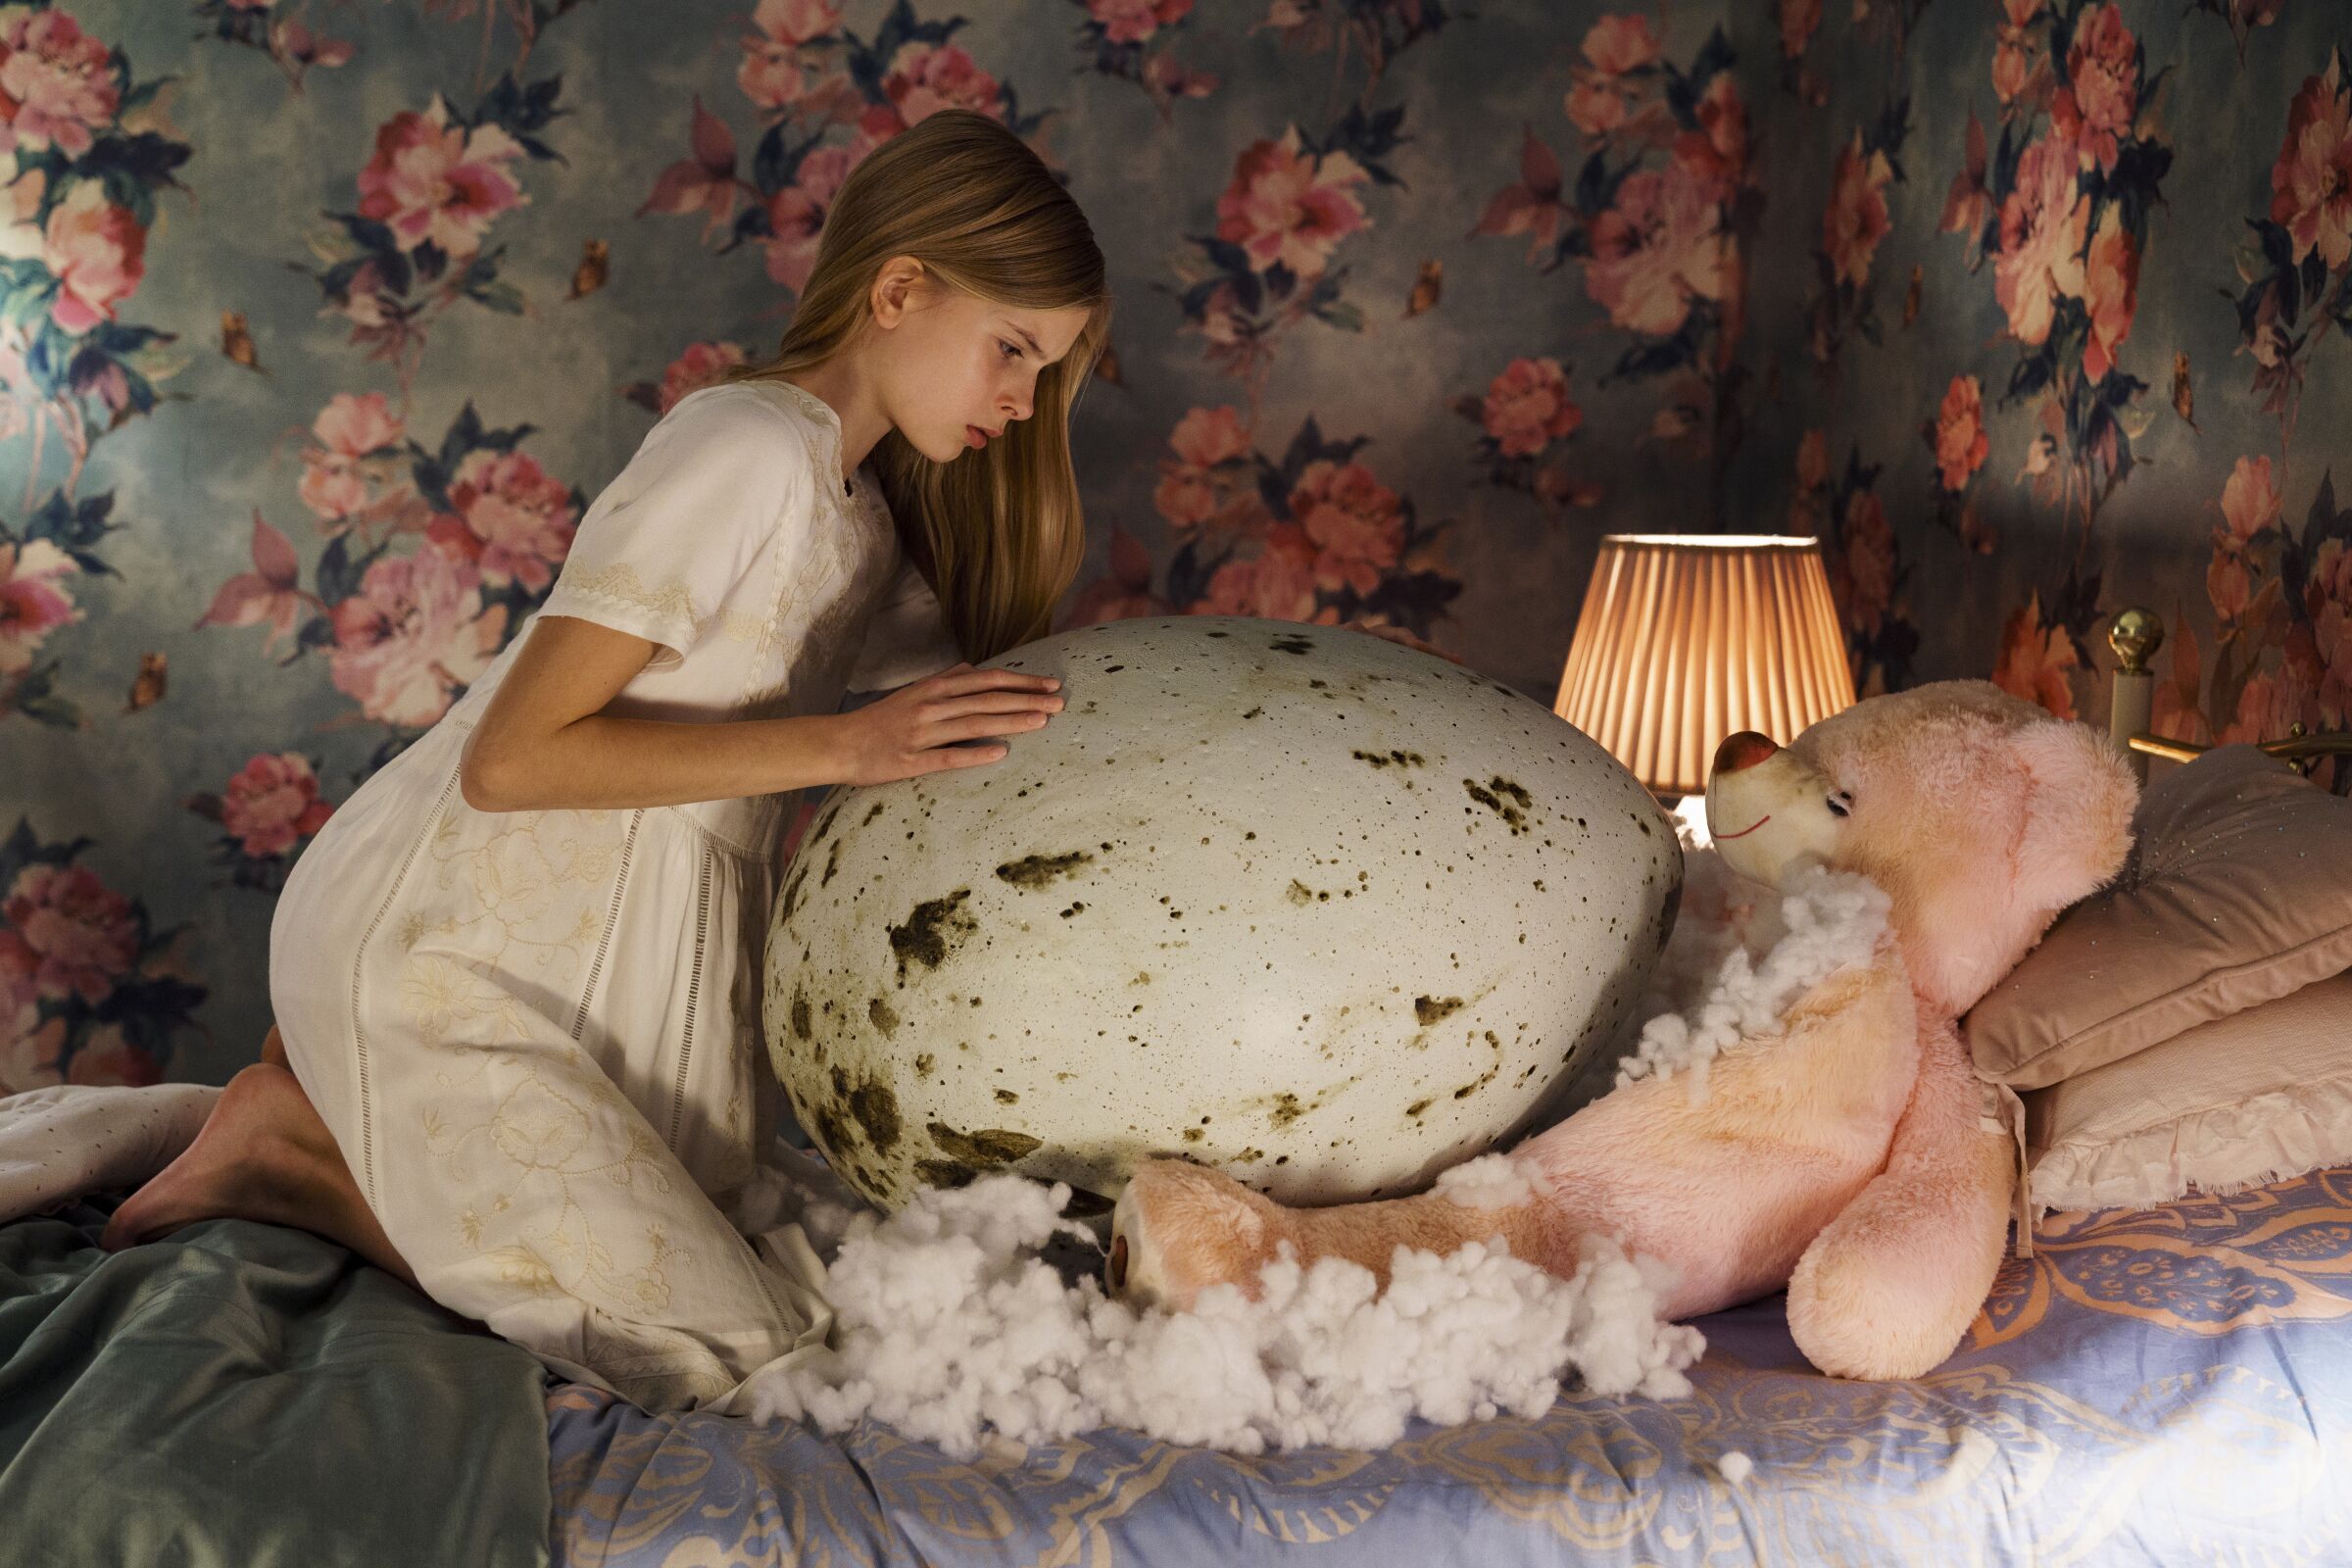 A girl looks over a giant egg in a bed with a large teddy bear 